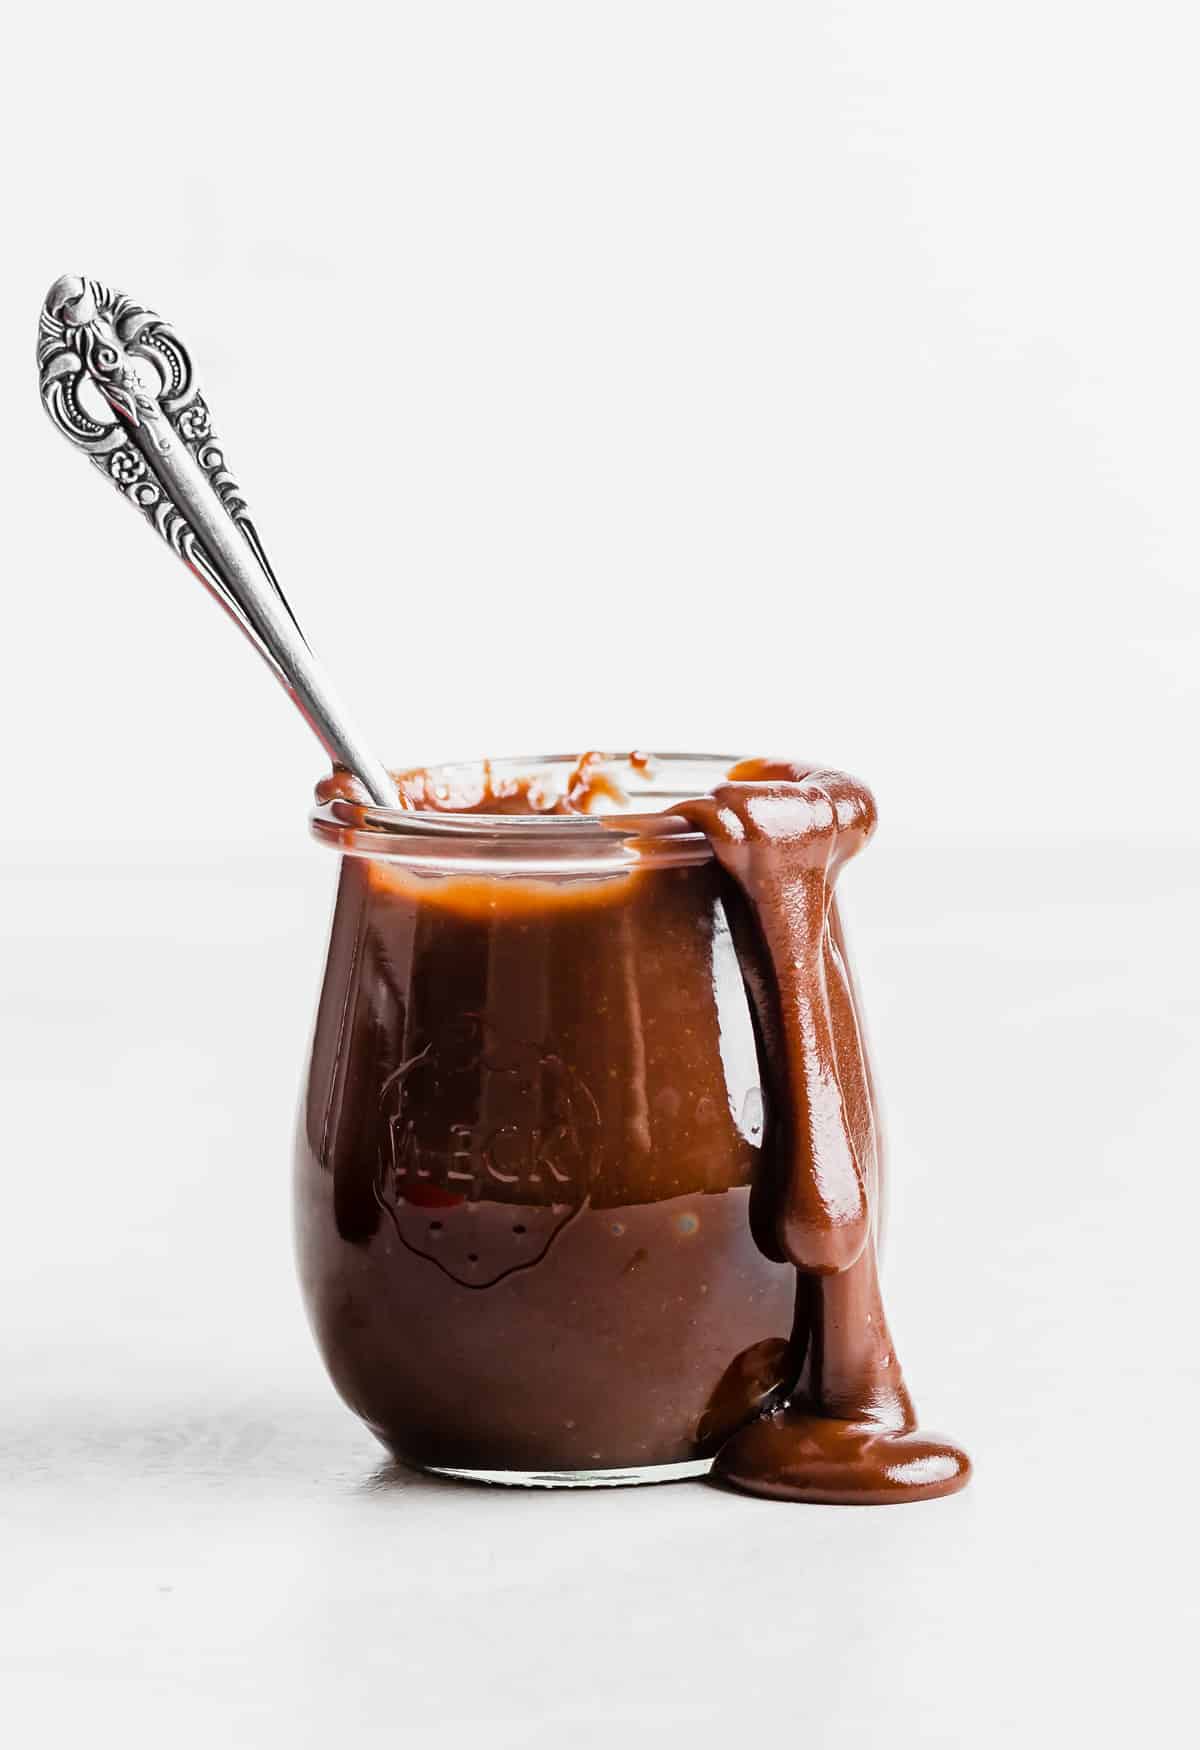 Hot Fudge Sauce made with evaporated milk in a glass jar against a white background.